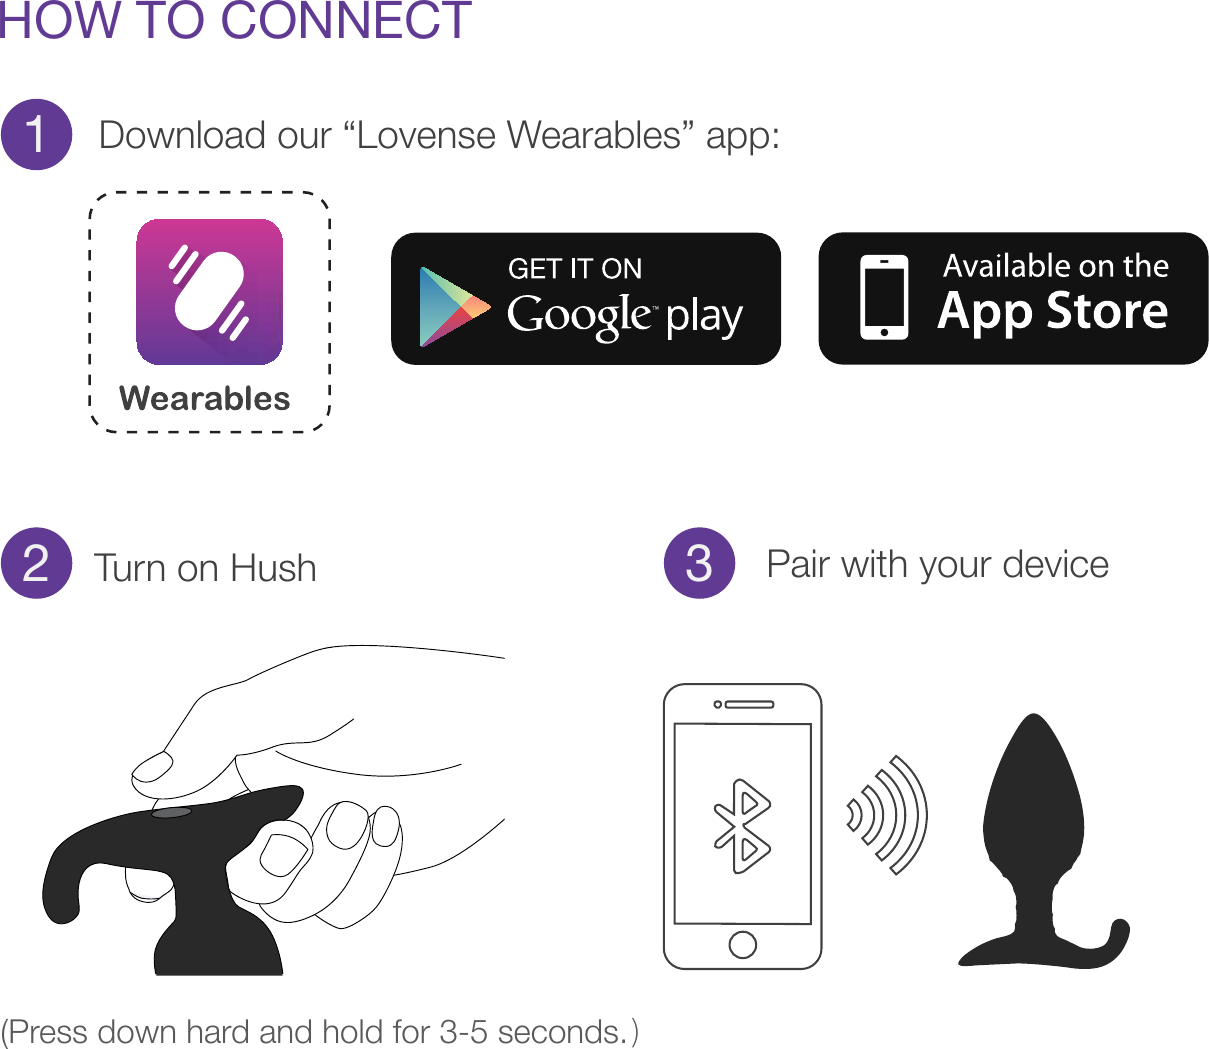 HOW TO CONNECTDownload our “Lovense Wearables” app:Pair with your device12 3(Press down hard and hold for 3-5 seconds.)Turn on Hush